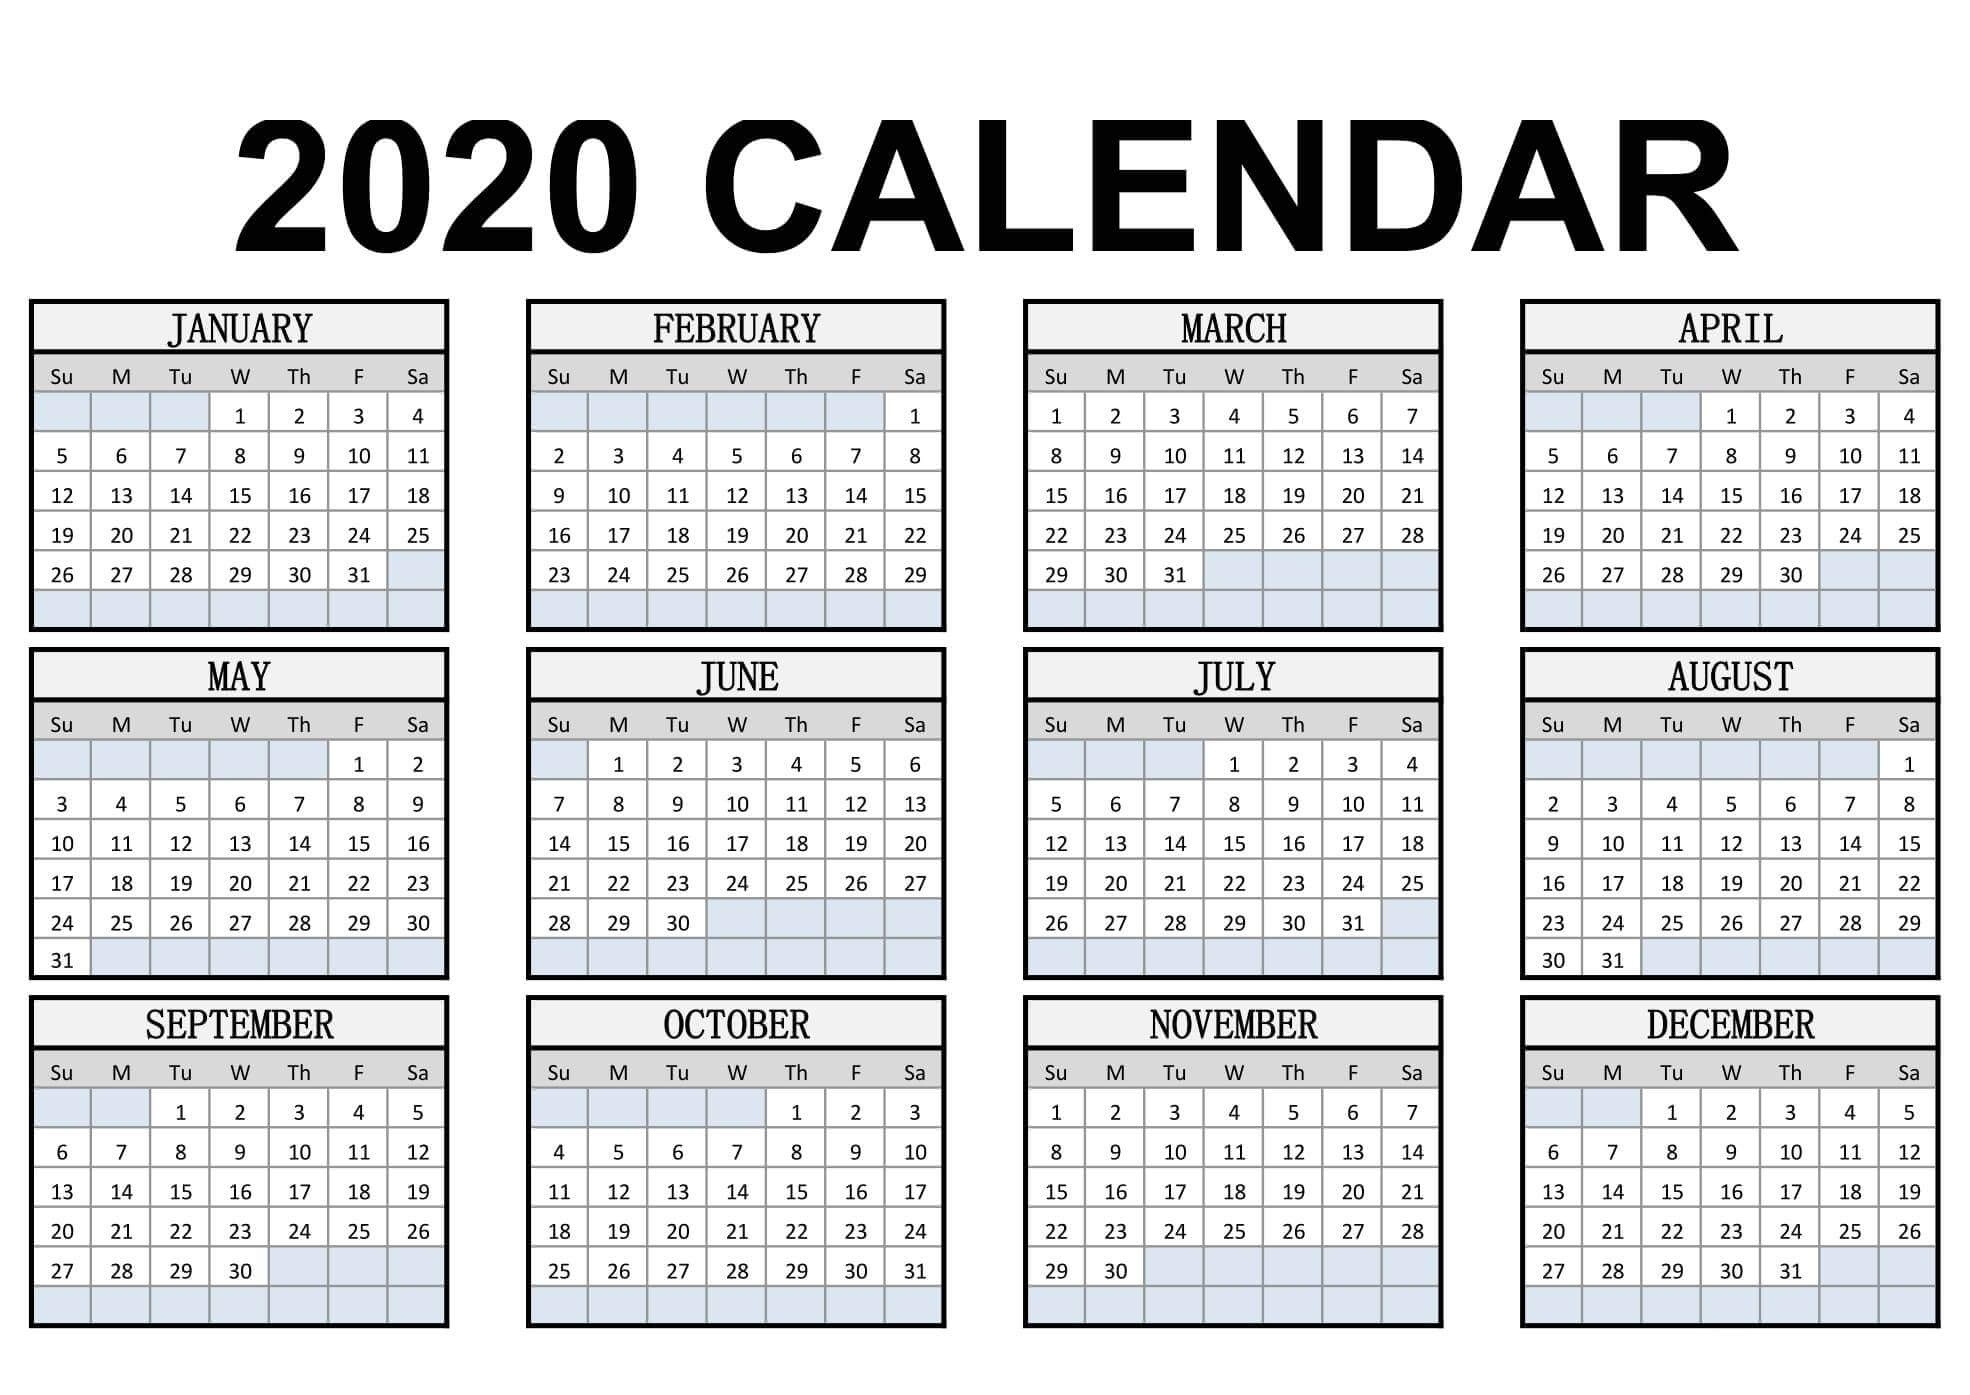 Calendar Year 2020 Holidays Template - 2019 Calendars For Incredible Printable 2020Calender For The Whole Year